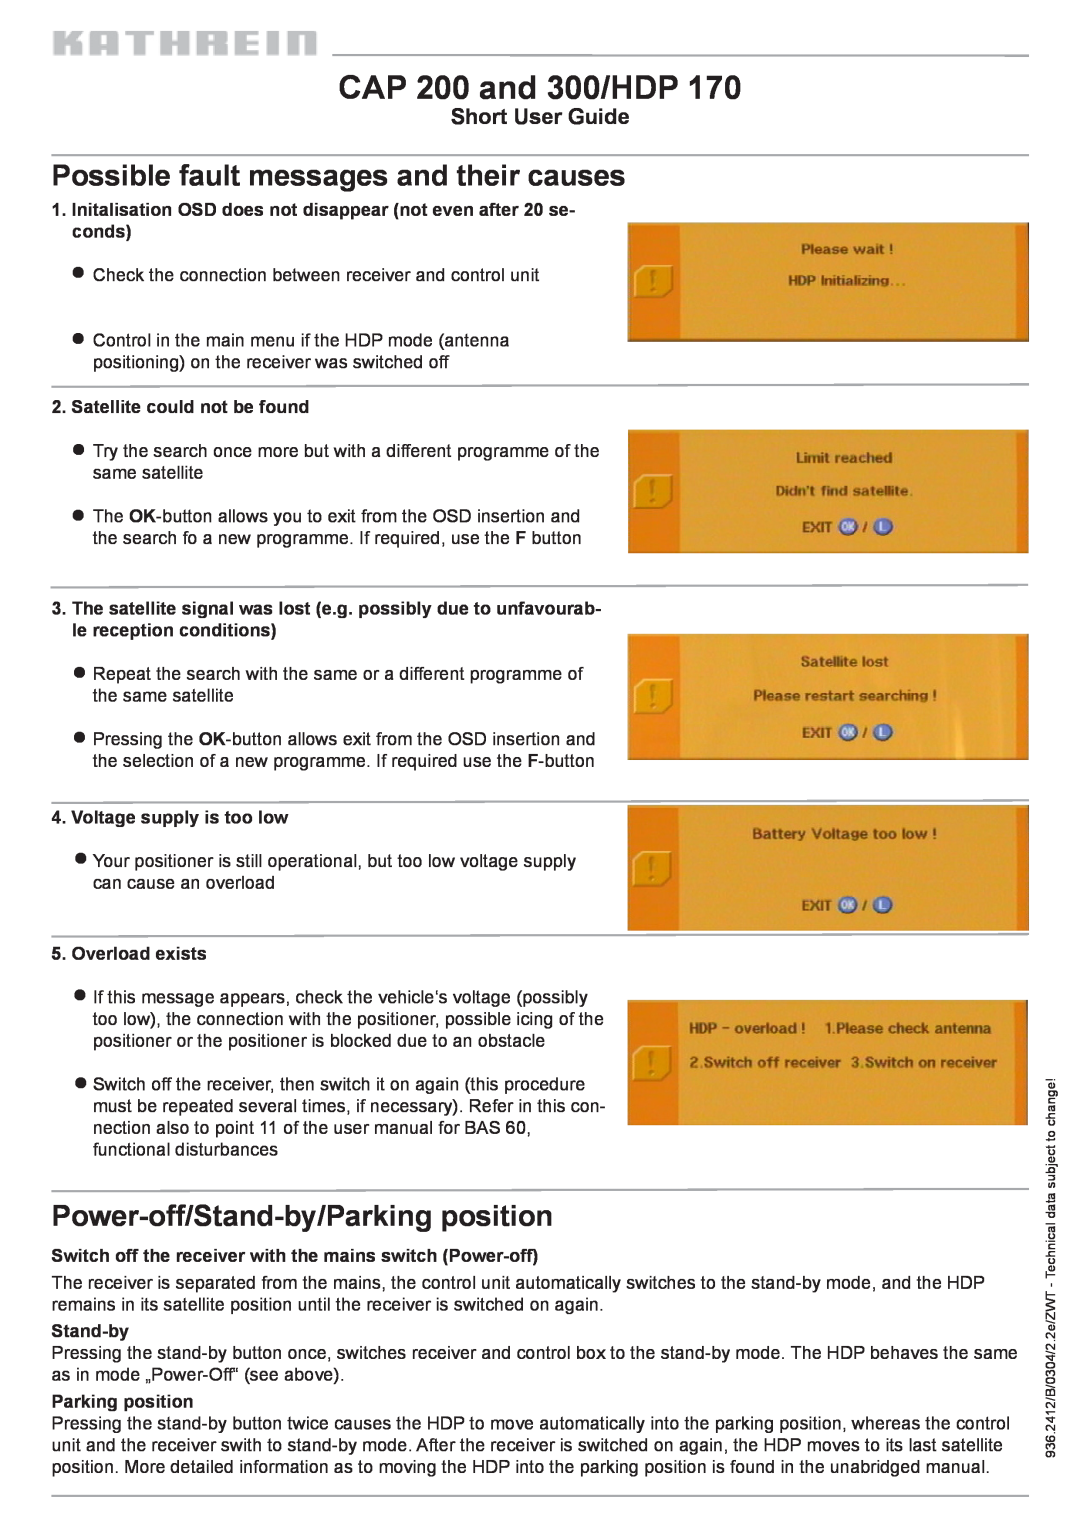 Kathrein CAP 200, CAP 300 Possible fault messages and their causes, Power-off/Stand-by/Parking position, Short User Guide 